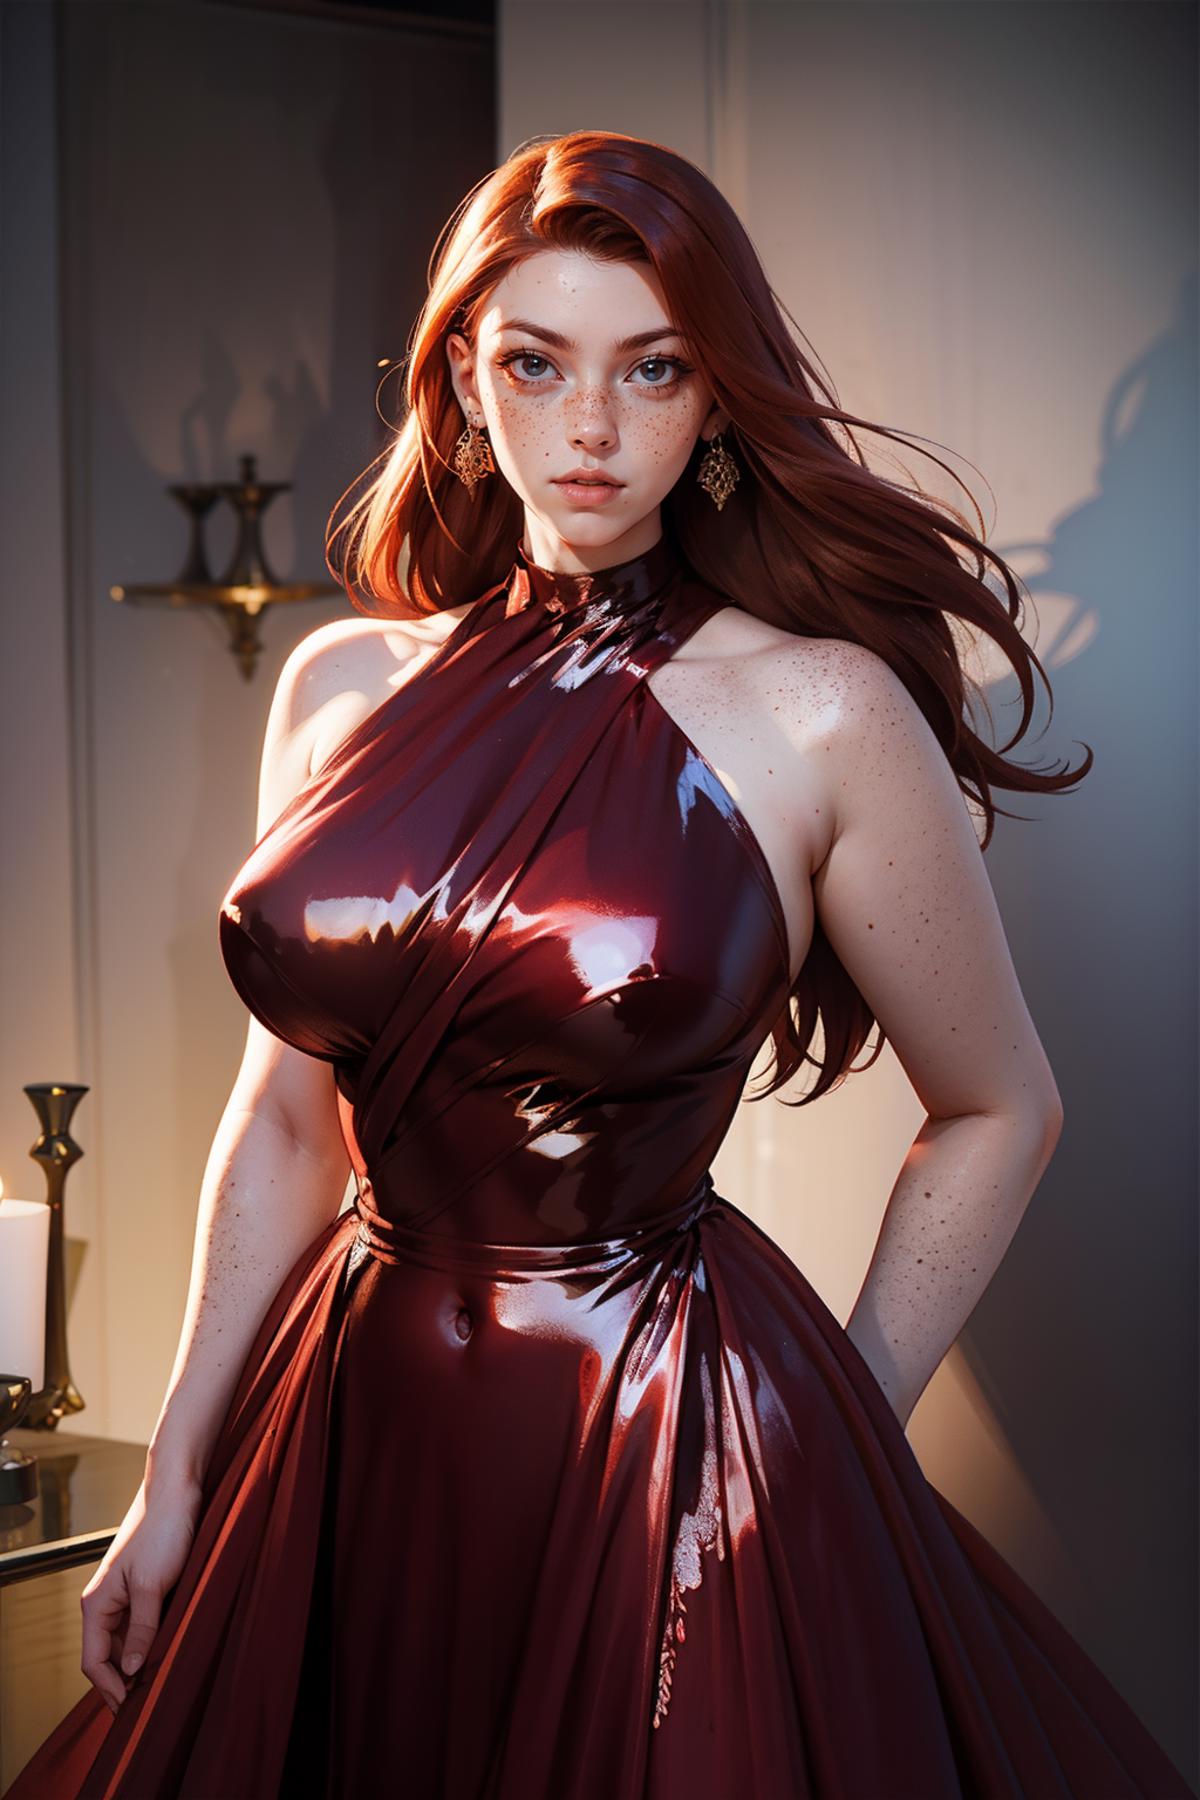 Red Rubber Dress image by freckledvixon